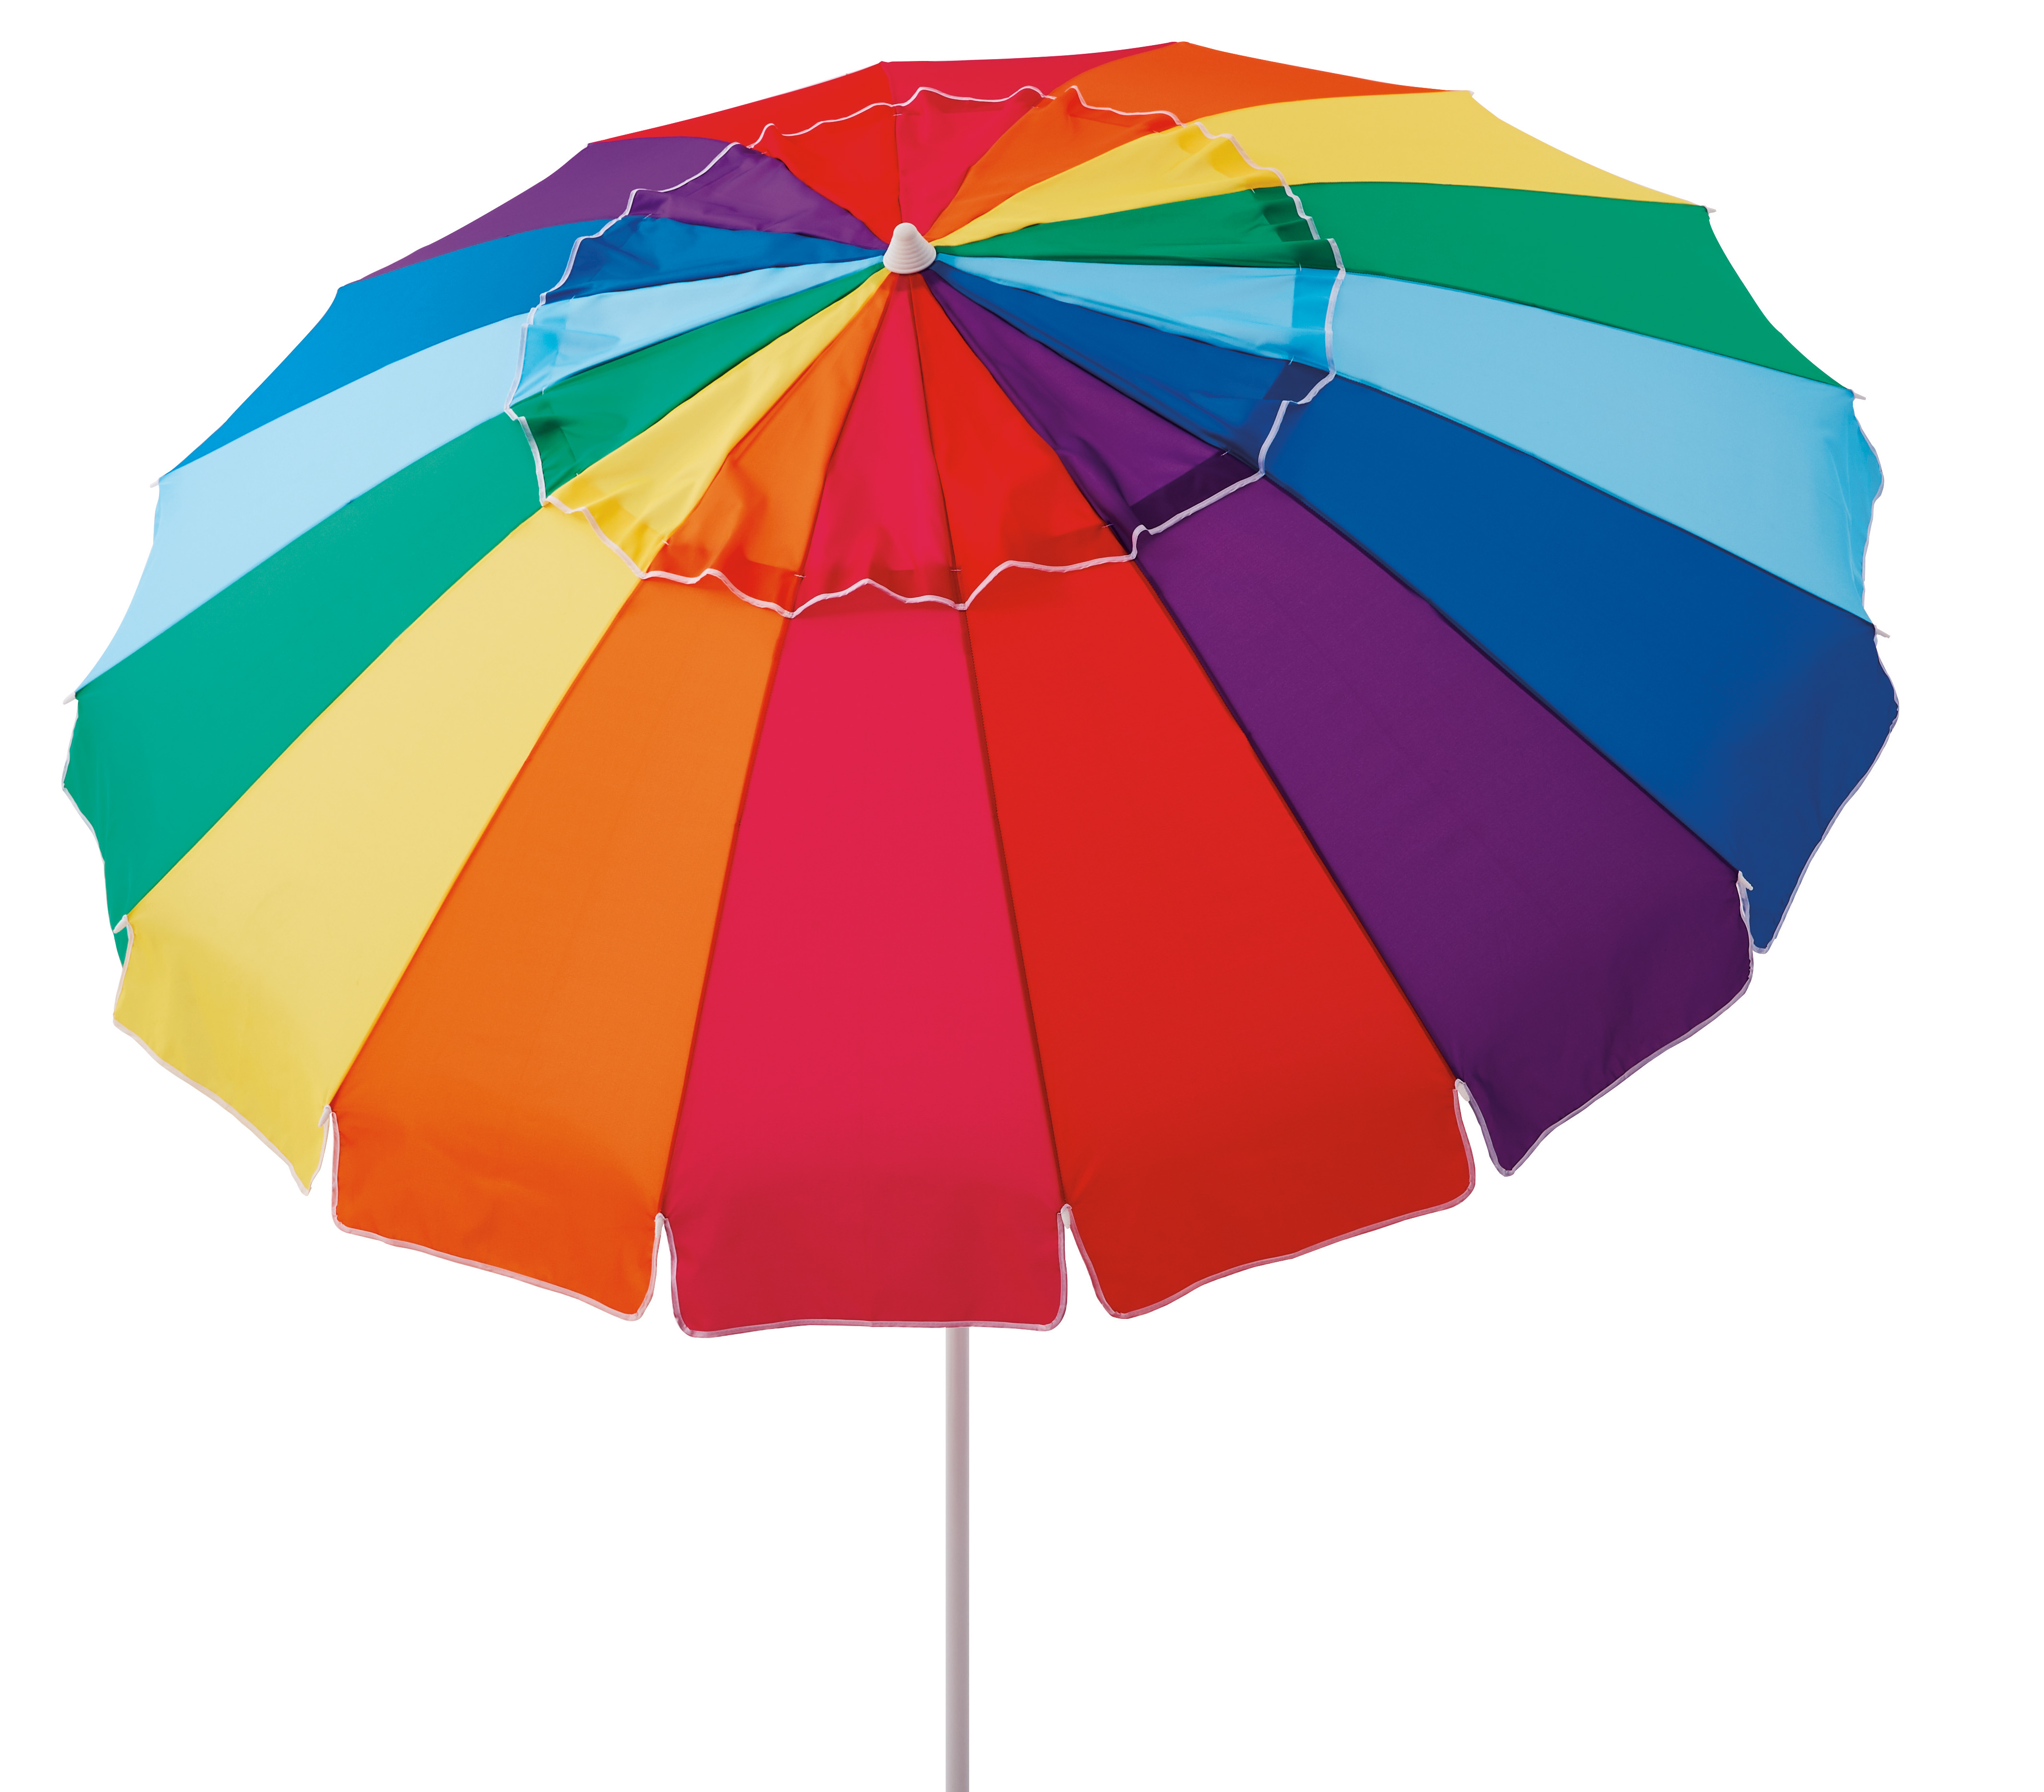 Mainstays 8 ft. Vented Tilt Rainbow Beach Umbrella with UV Protection - image 1 of 5